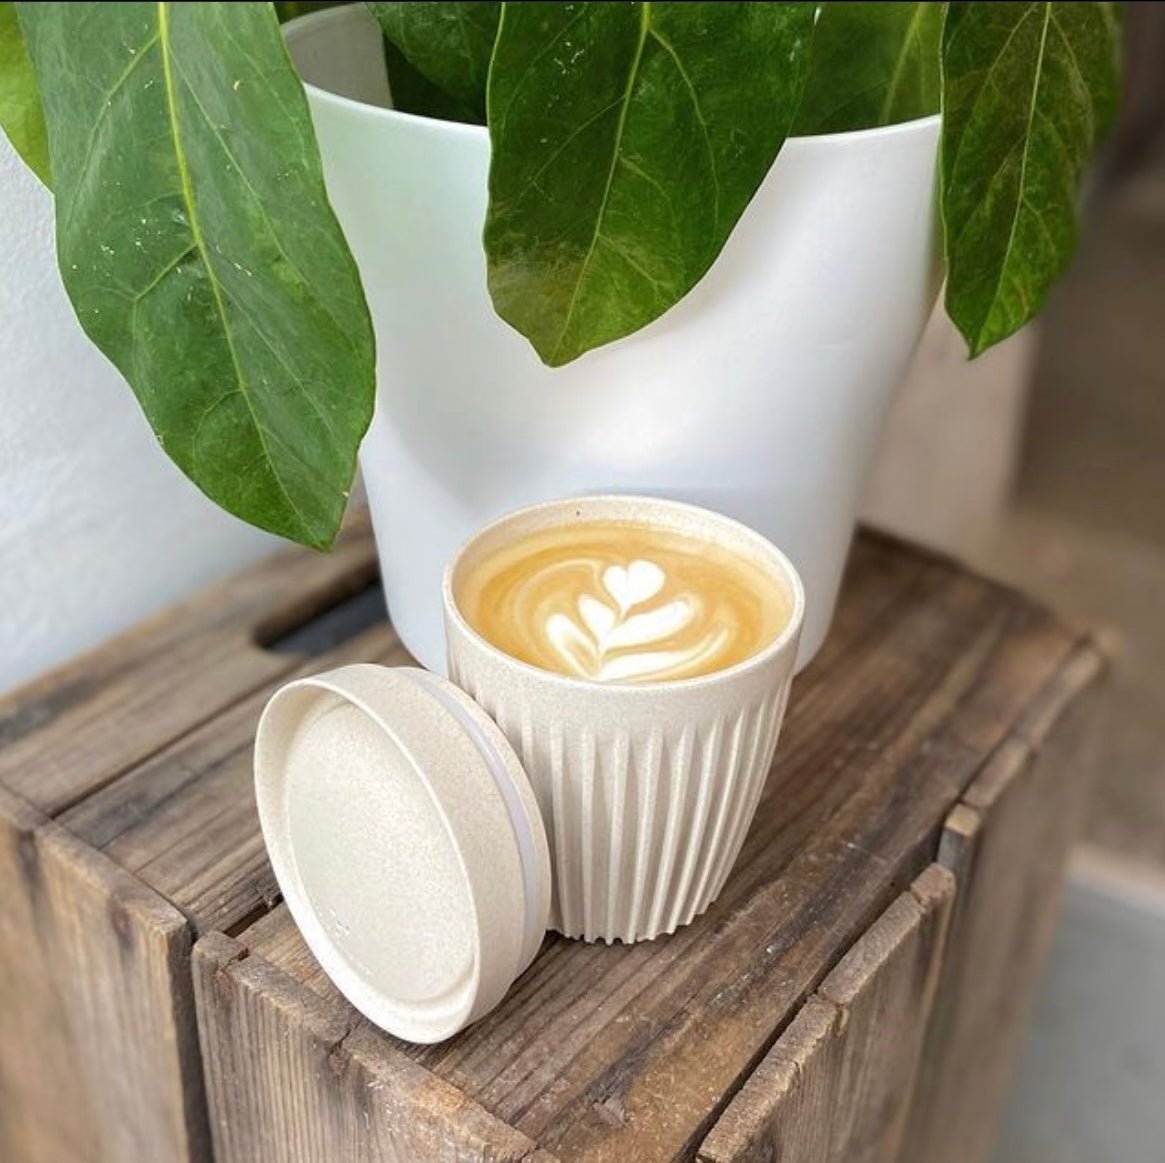 cream coffee cup holding a latte, and stood on a crate, beside a plant pot